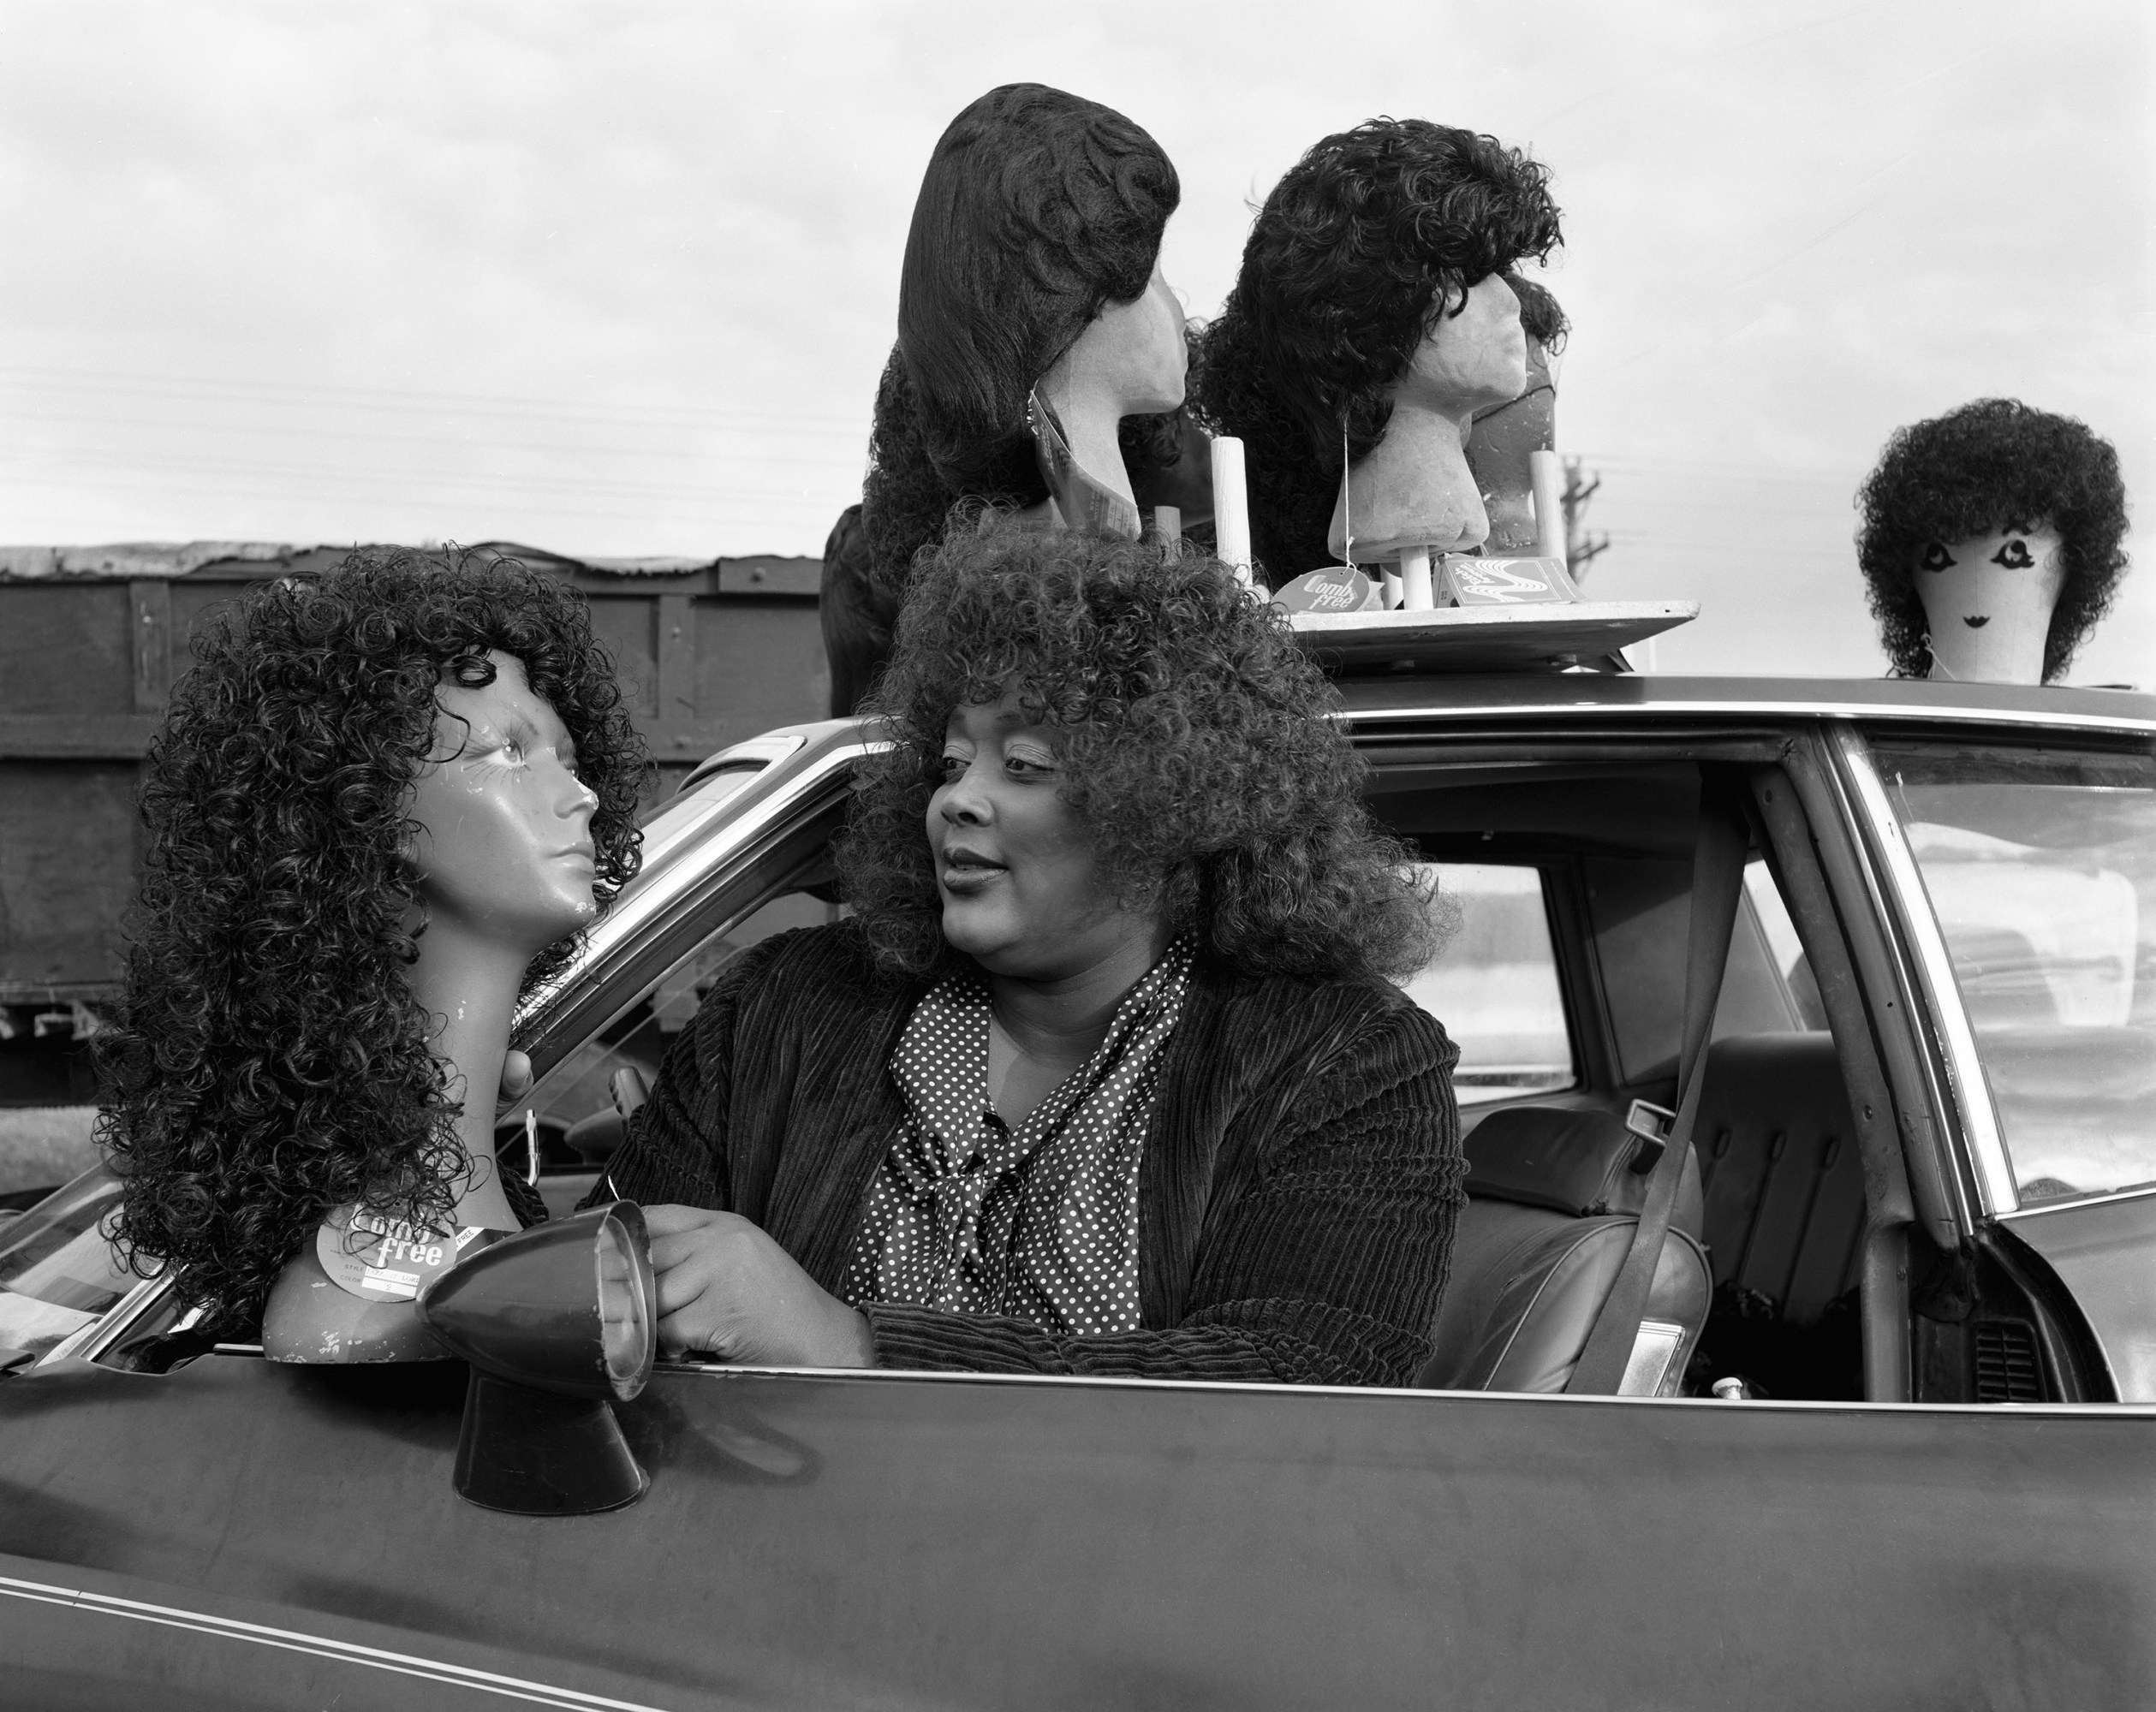 A woman leans out of the window of her car. Several mannequin heads with wigs are mounted to the roof, and she is holding one near her driver's side mirror.